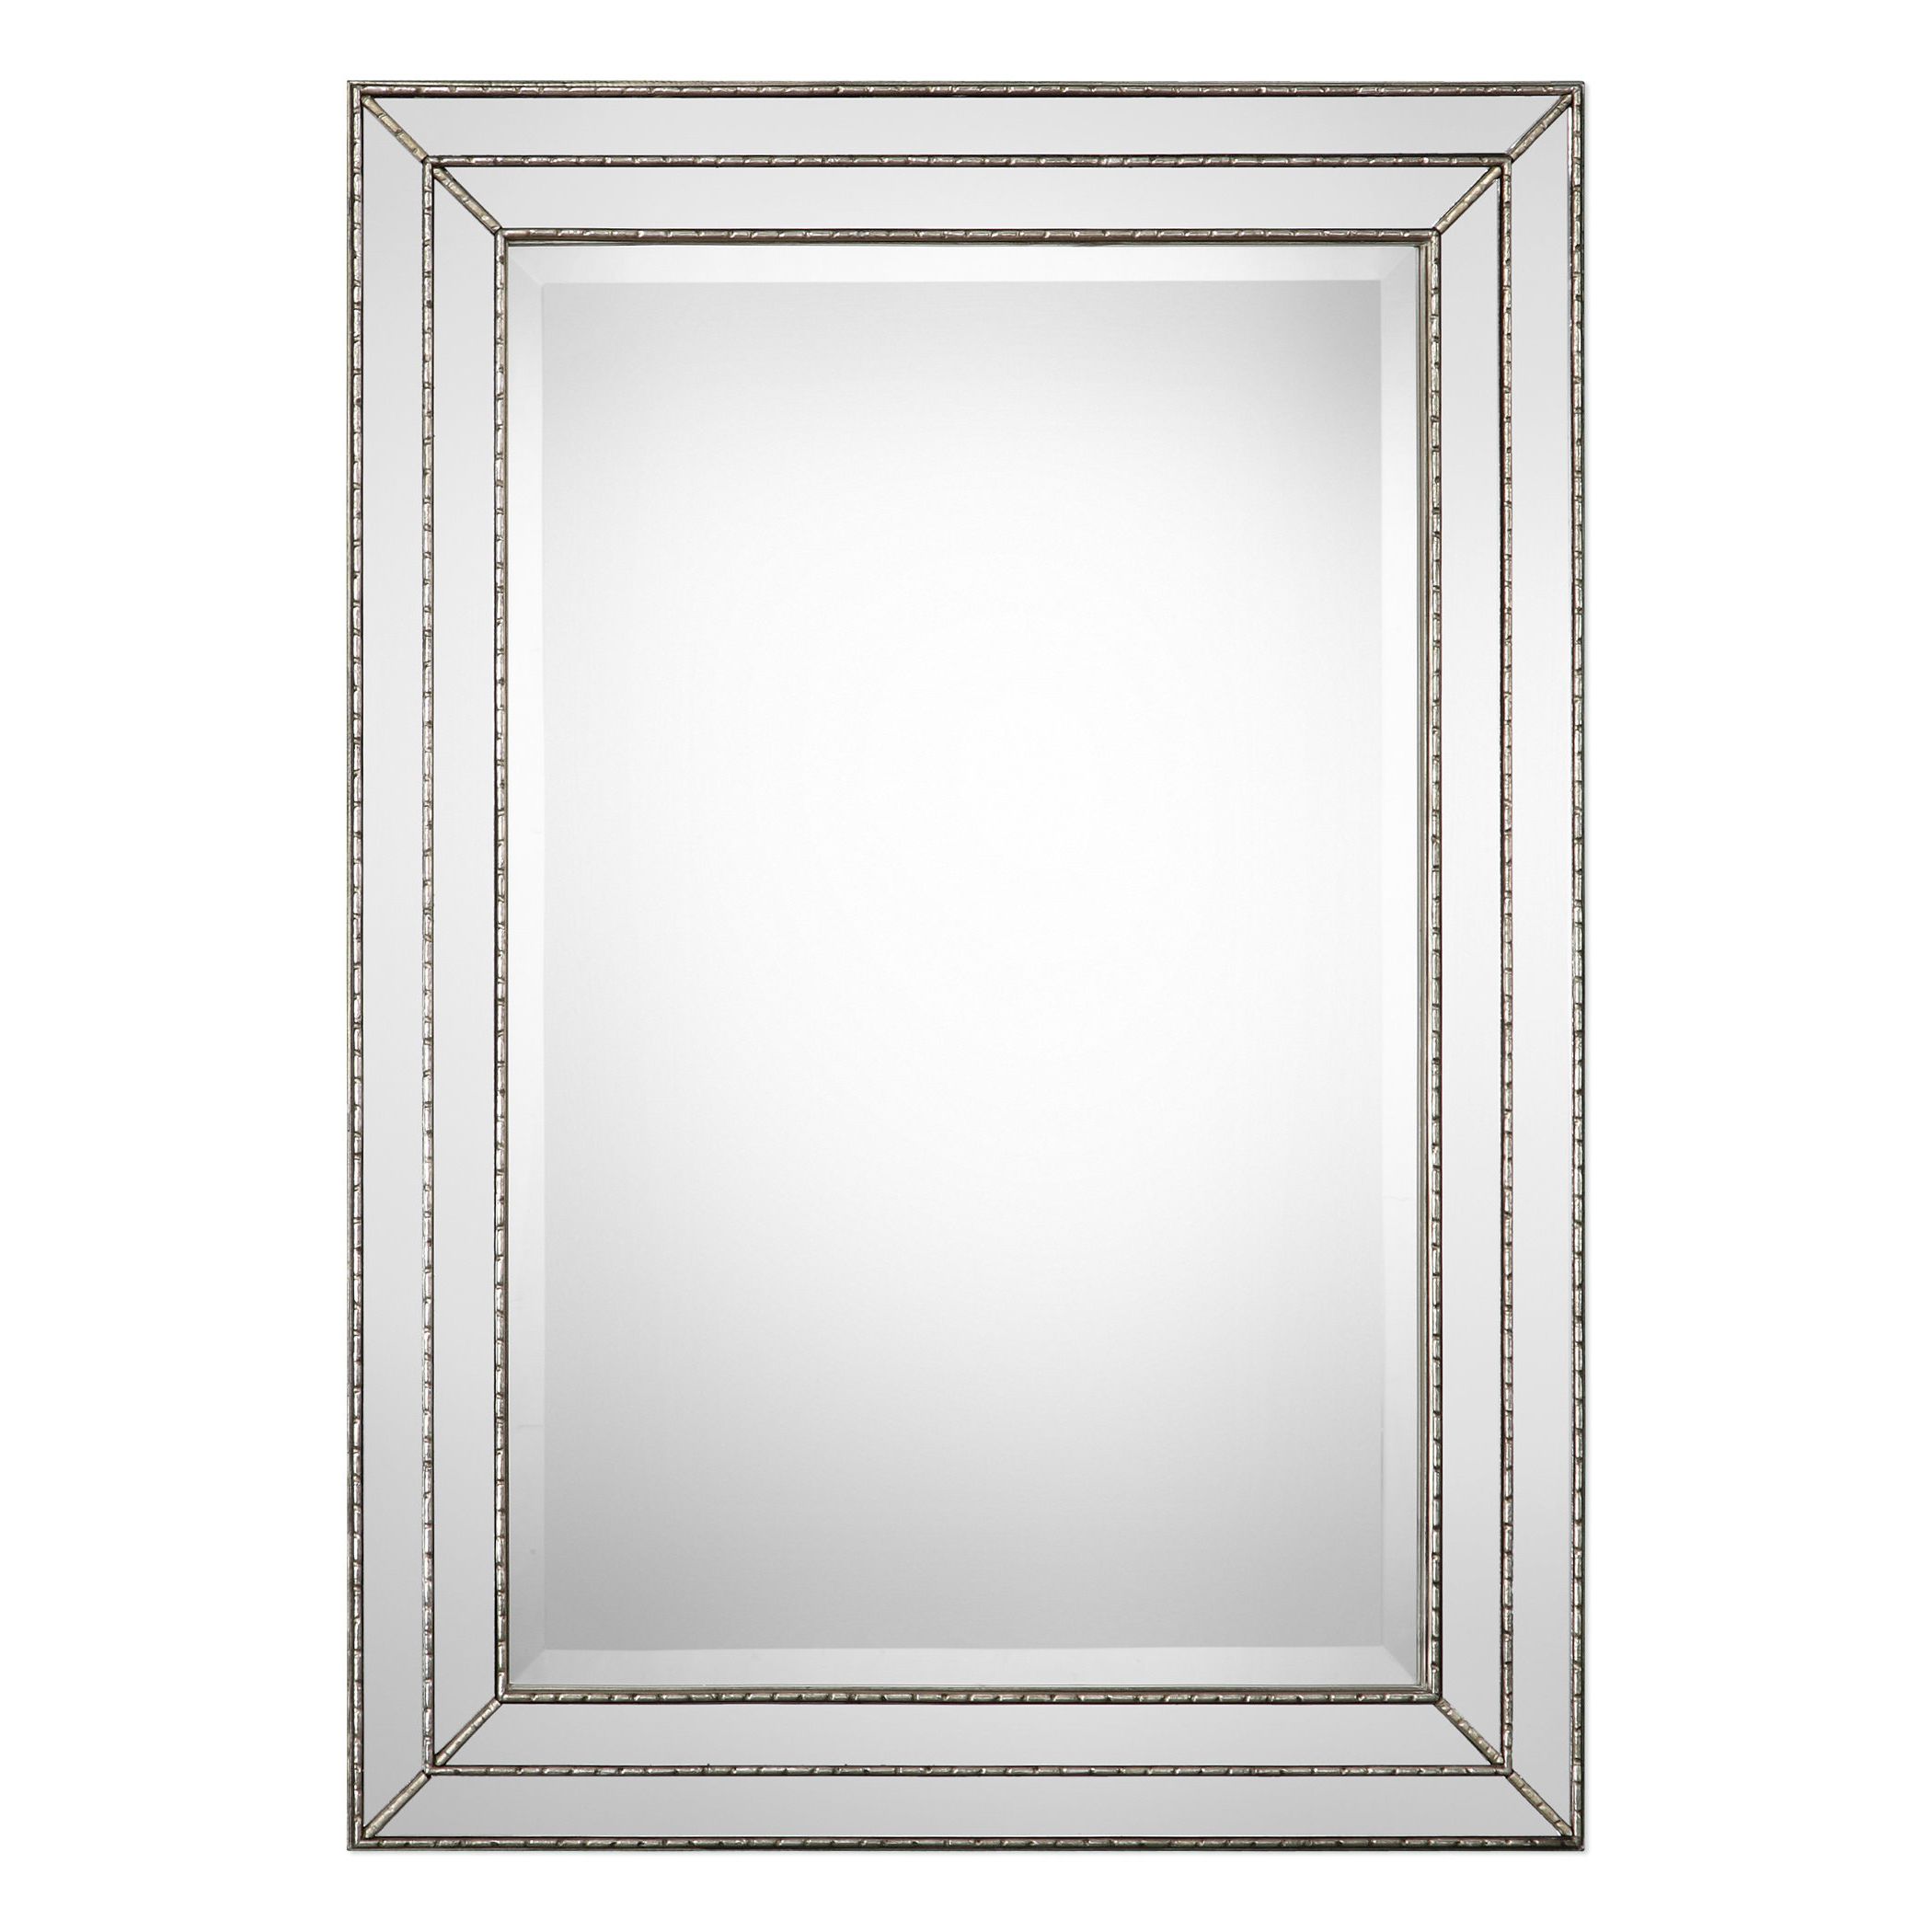 Most Recent Greyleigh Willacoochee Traditional Beveled Accent Mirror With Alie Traditional Beveled Distressed Accent Mirrors (View 13 of 20)